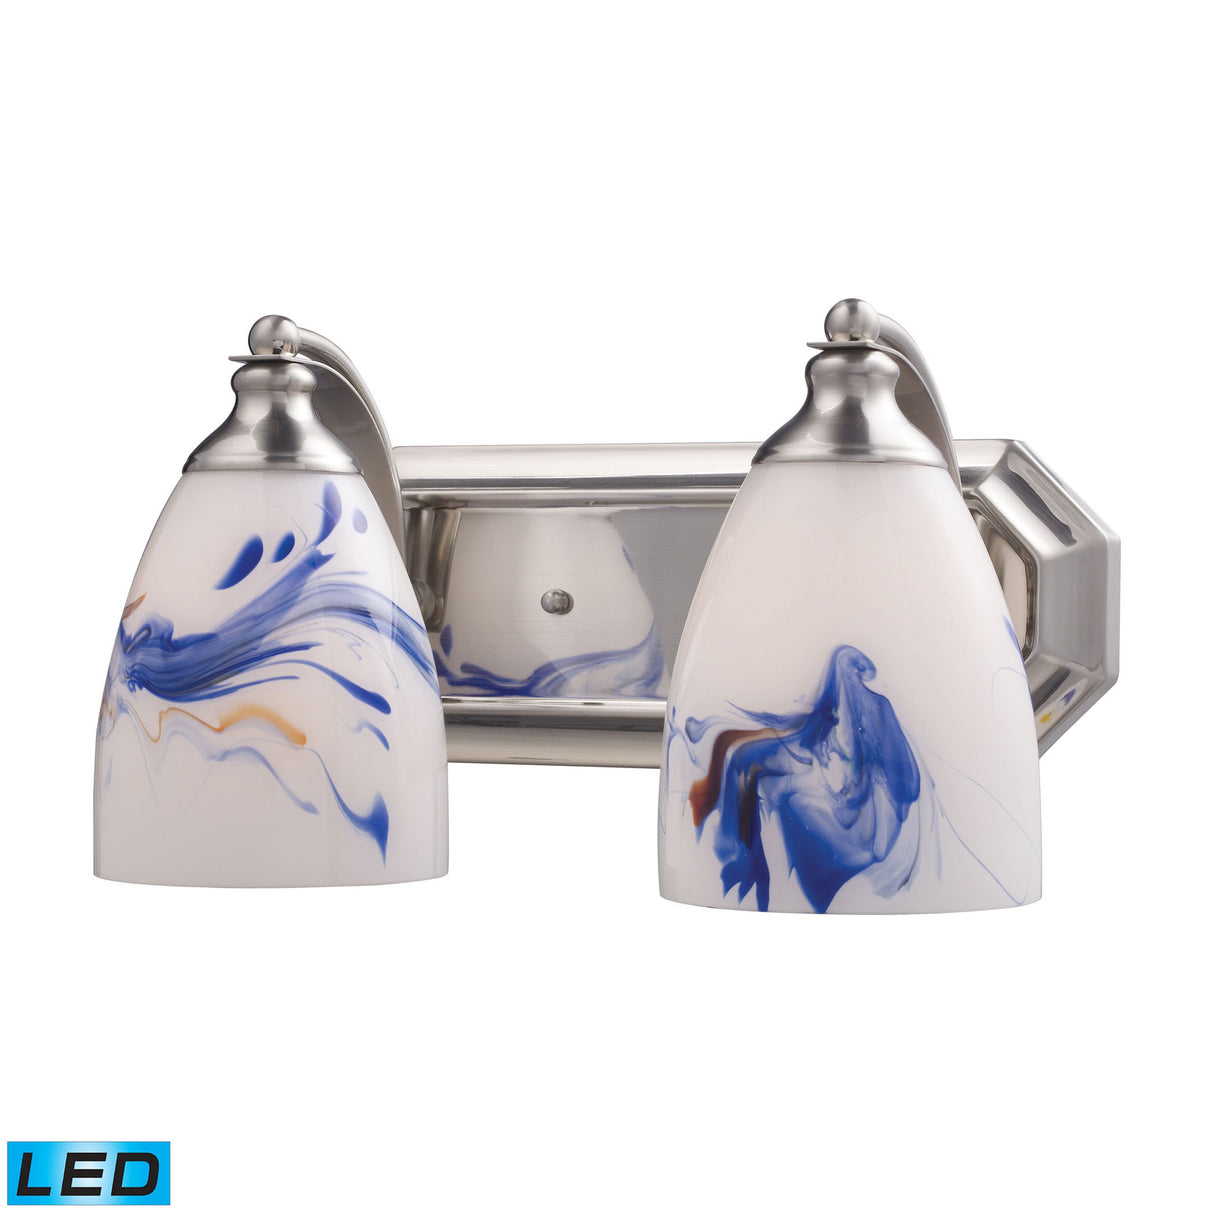 Elk 570-2N-MT-LED Mix-N-Match Vanity 2-Light Wall Lamp in Satin Nickel with Mountain Glass - Includes LED Bulbs